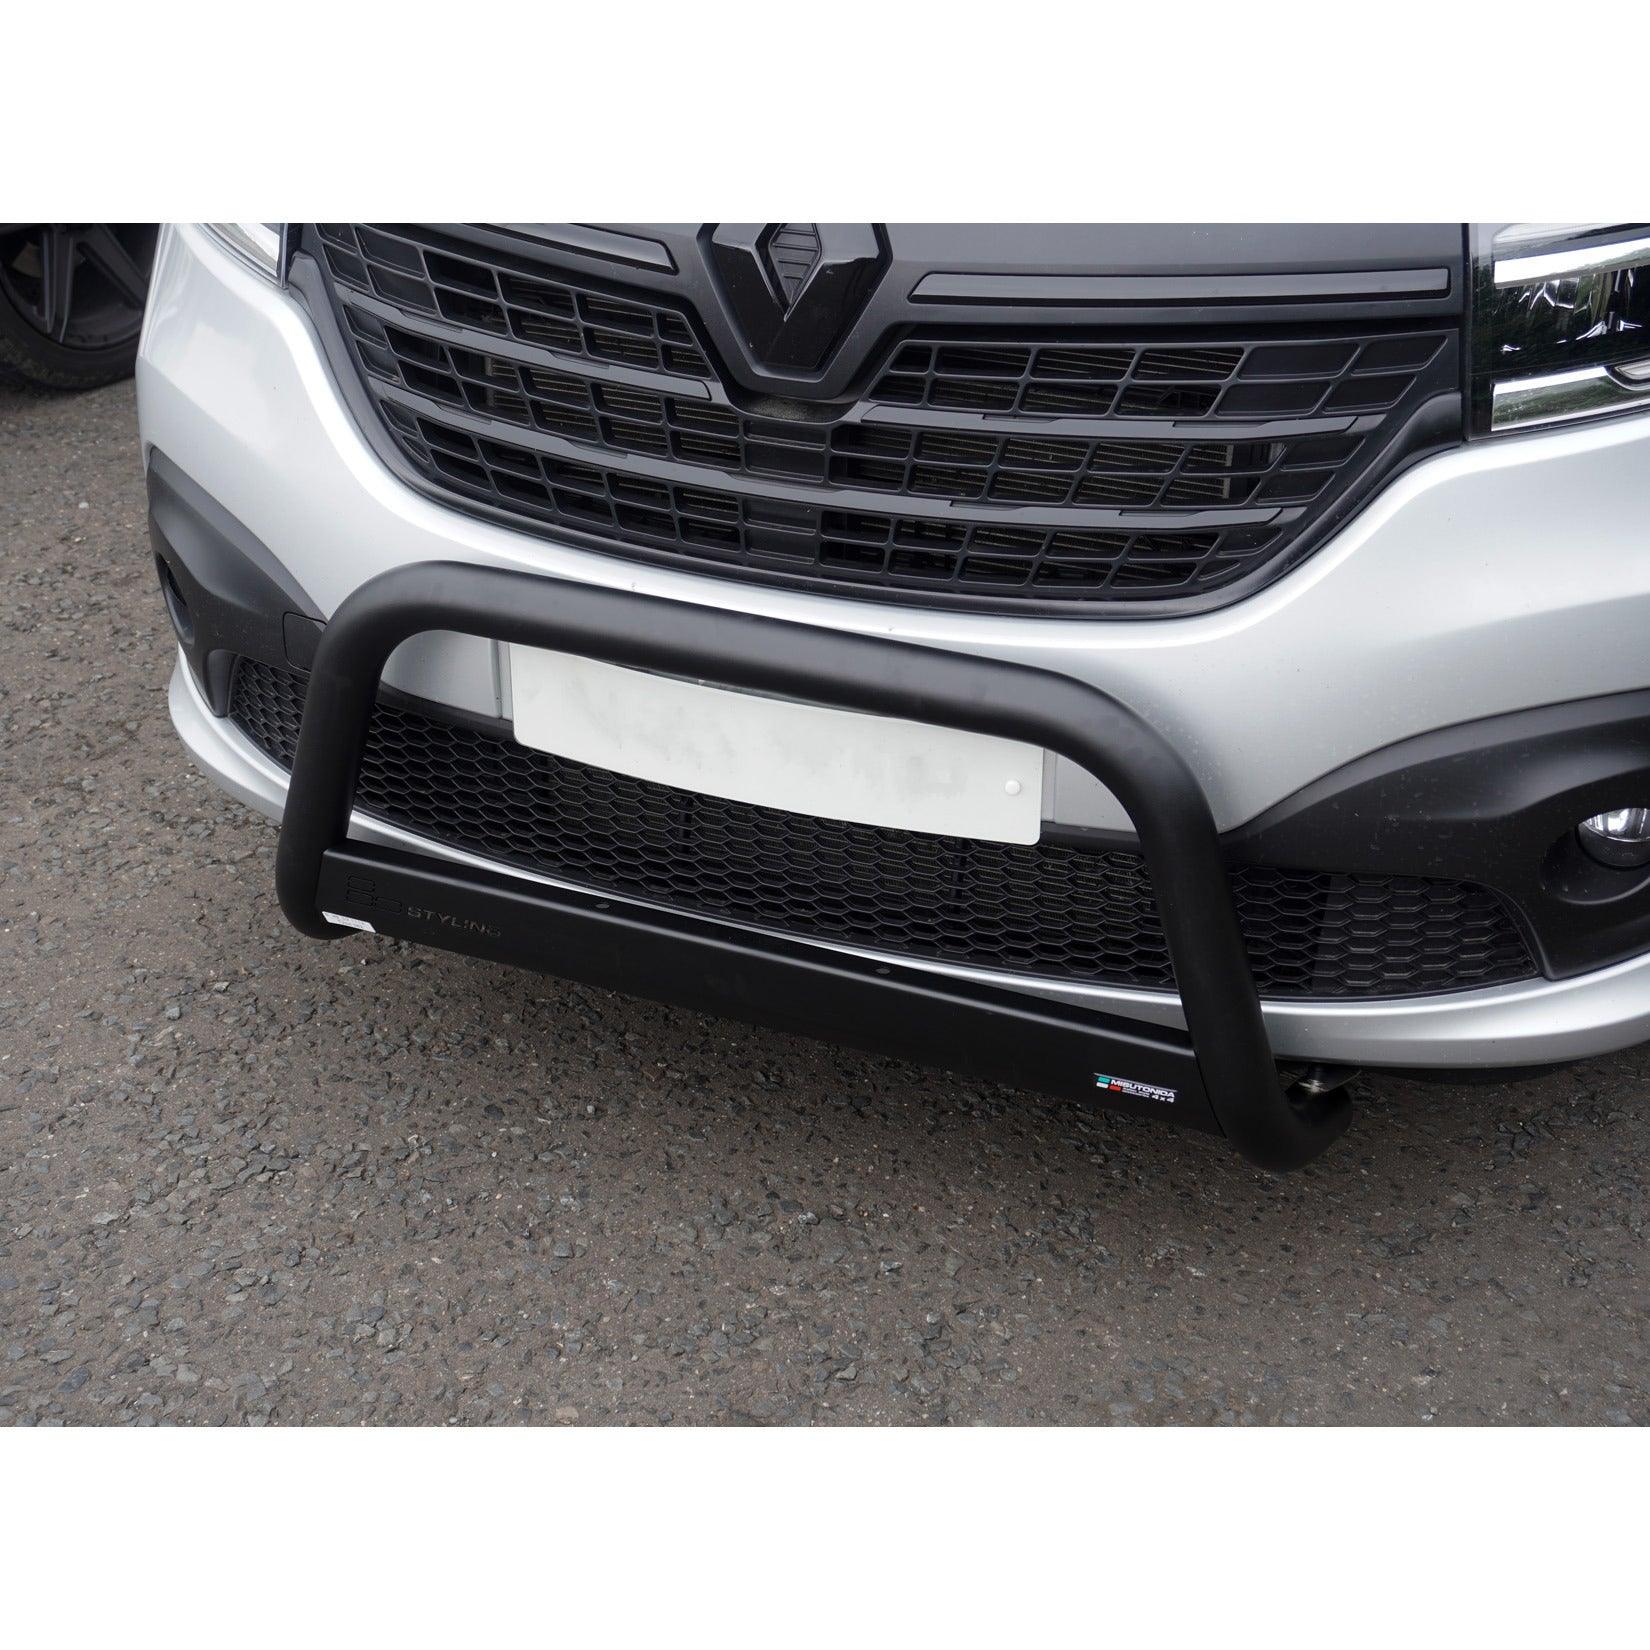 RENAULT TRAFIC 2014 ON MISUTONIDA EU APPROVED FRONT BAR IN BLACK - 63MM - Storm Xccessories2